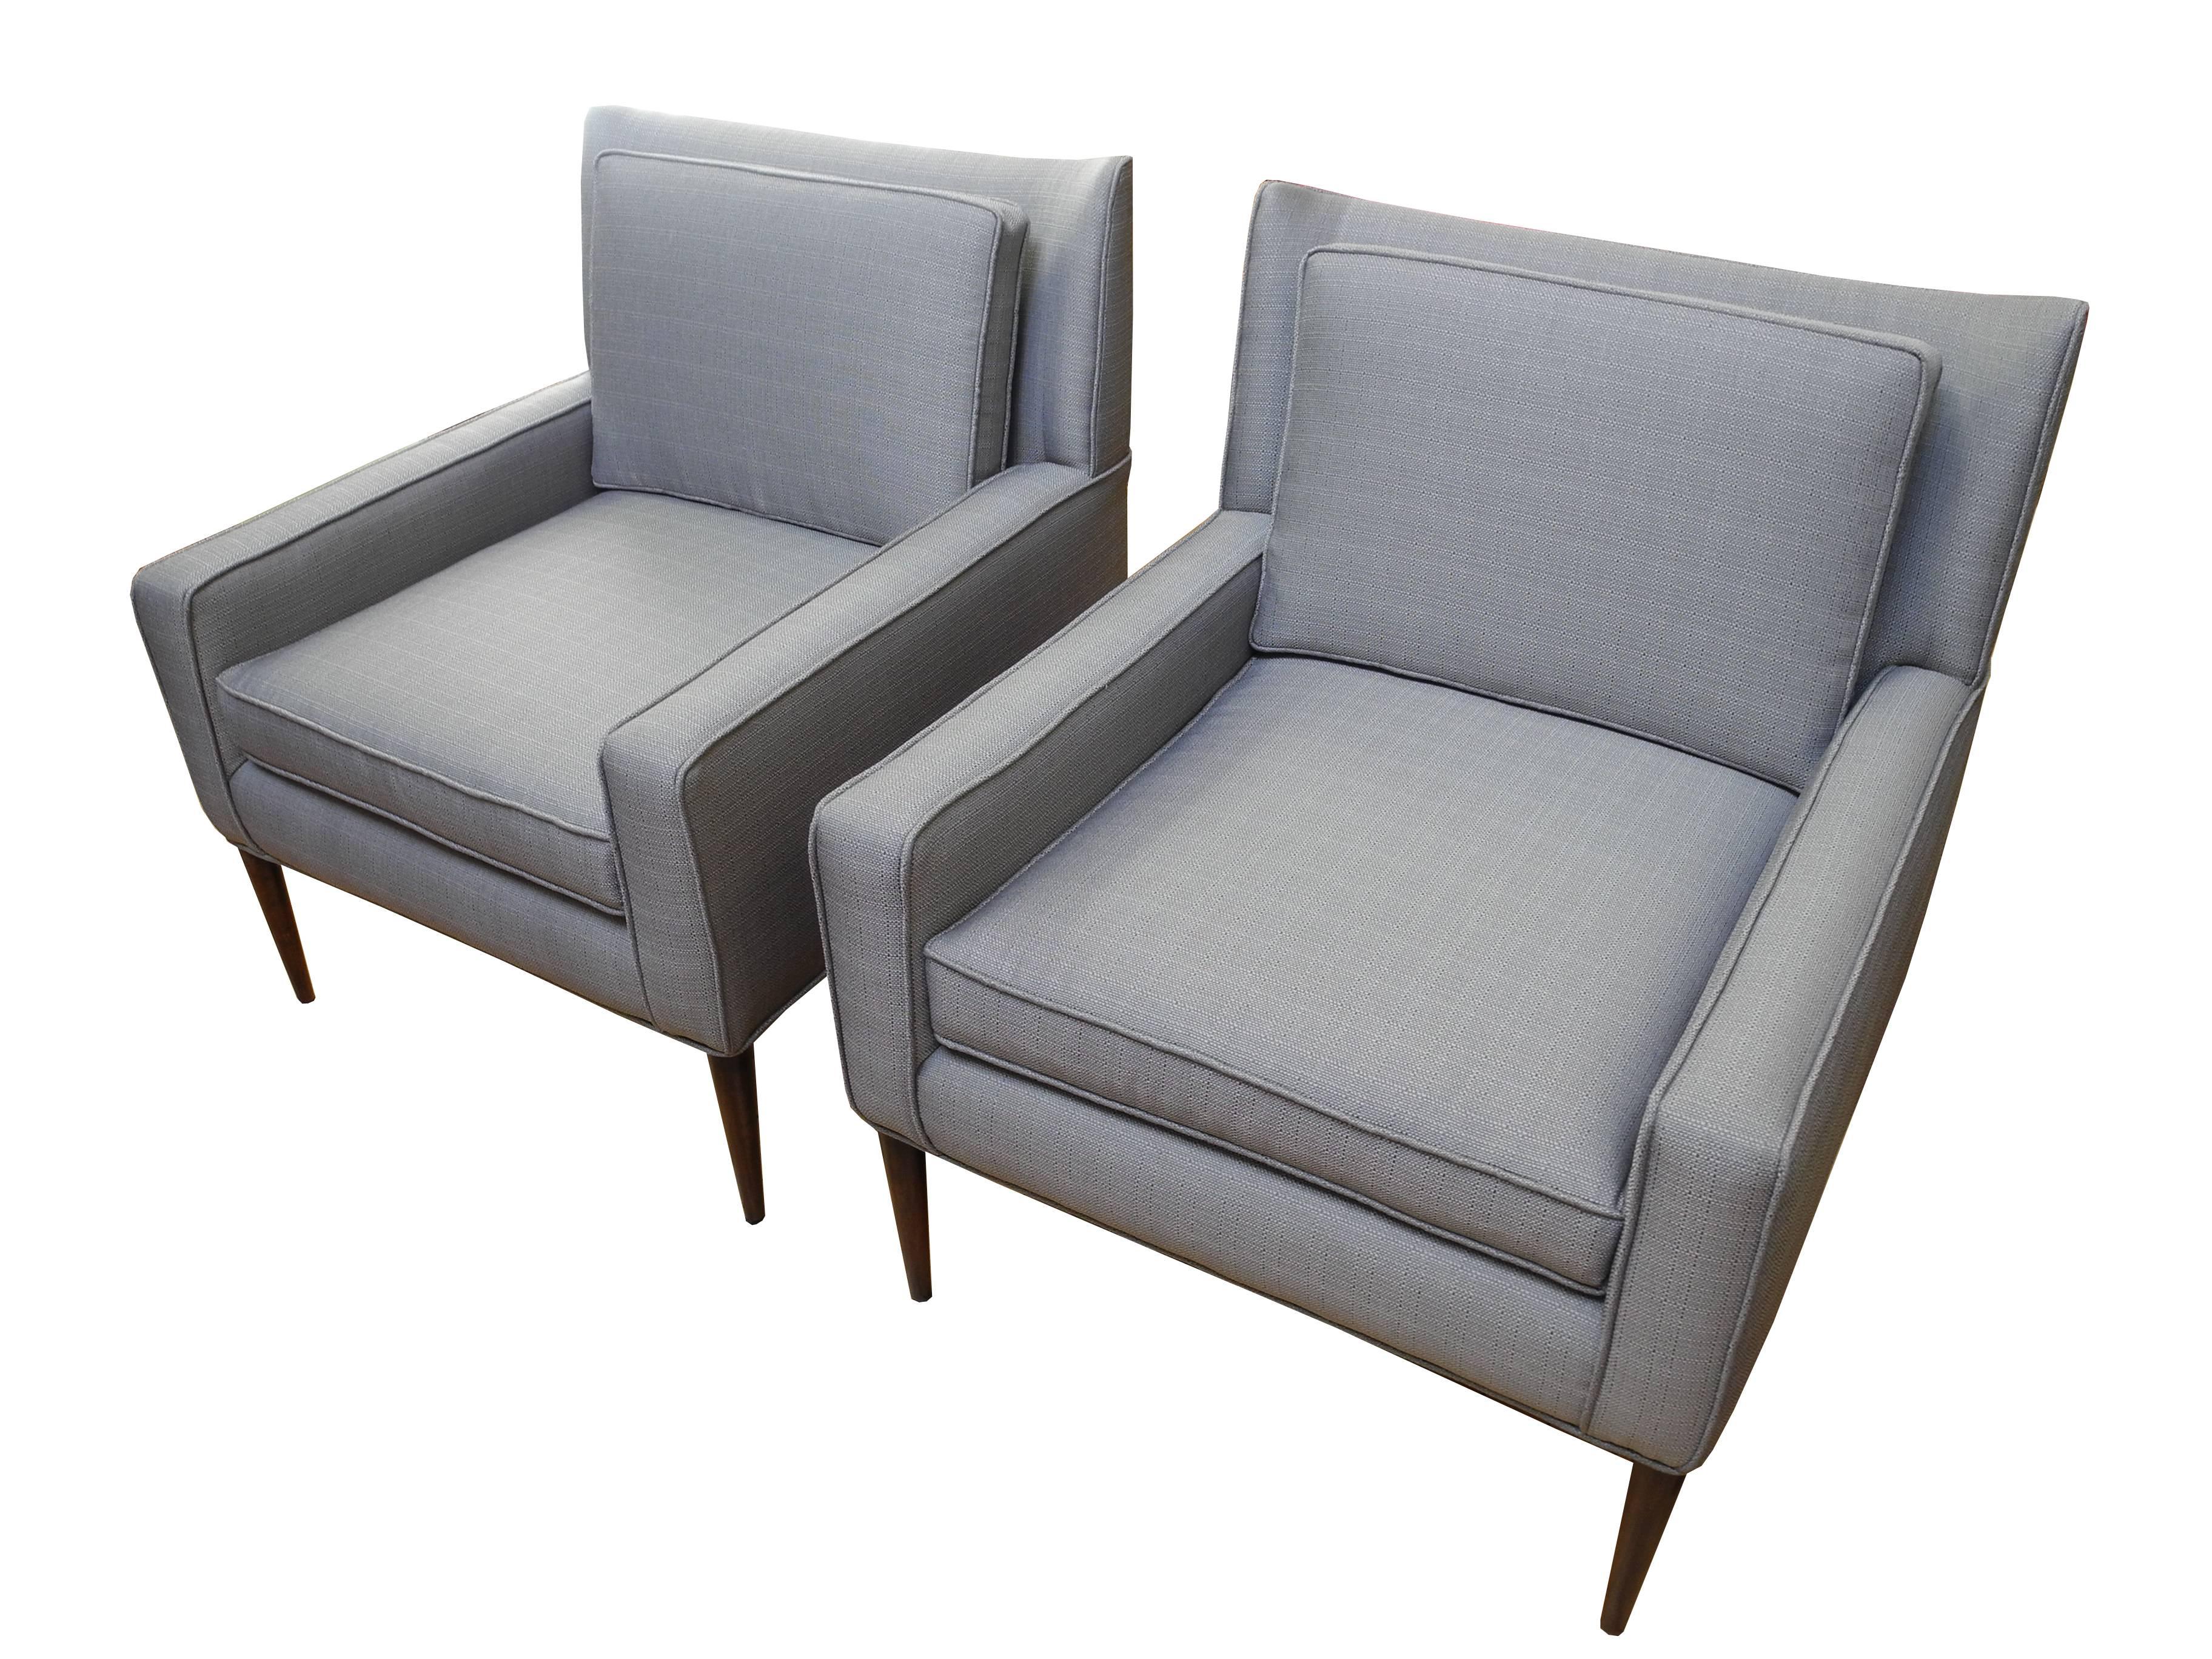 Mid-Century Modern Pair of Modern Upholstered Lounge Chairs Designed by Paul McCobb for Directional For Sale